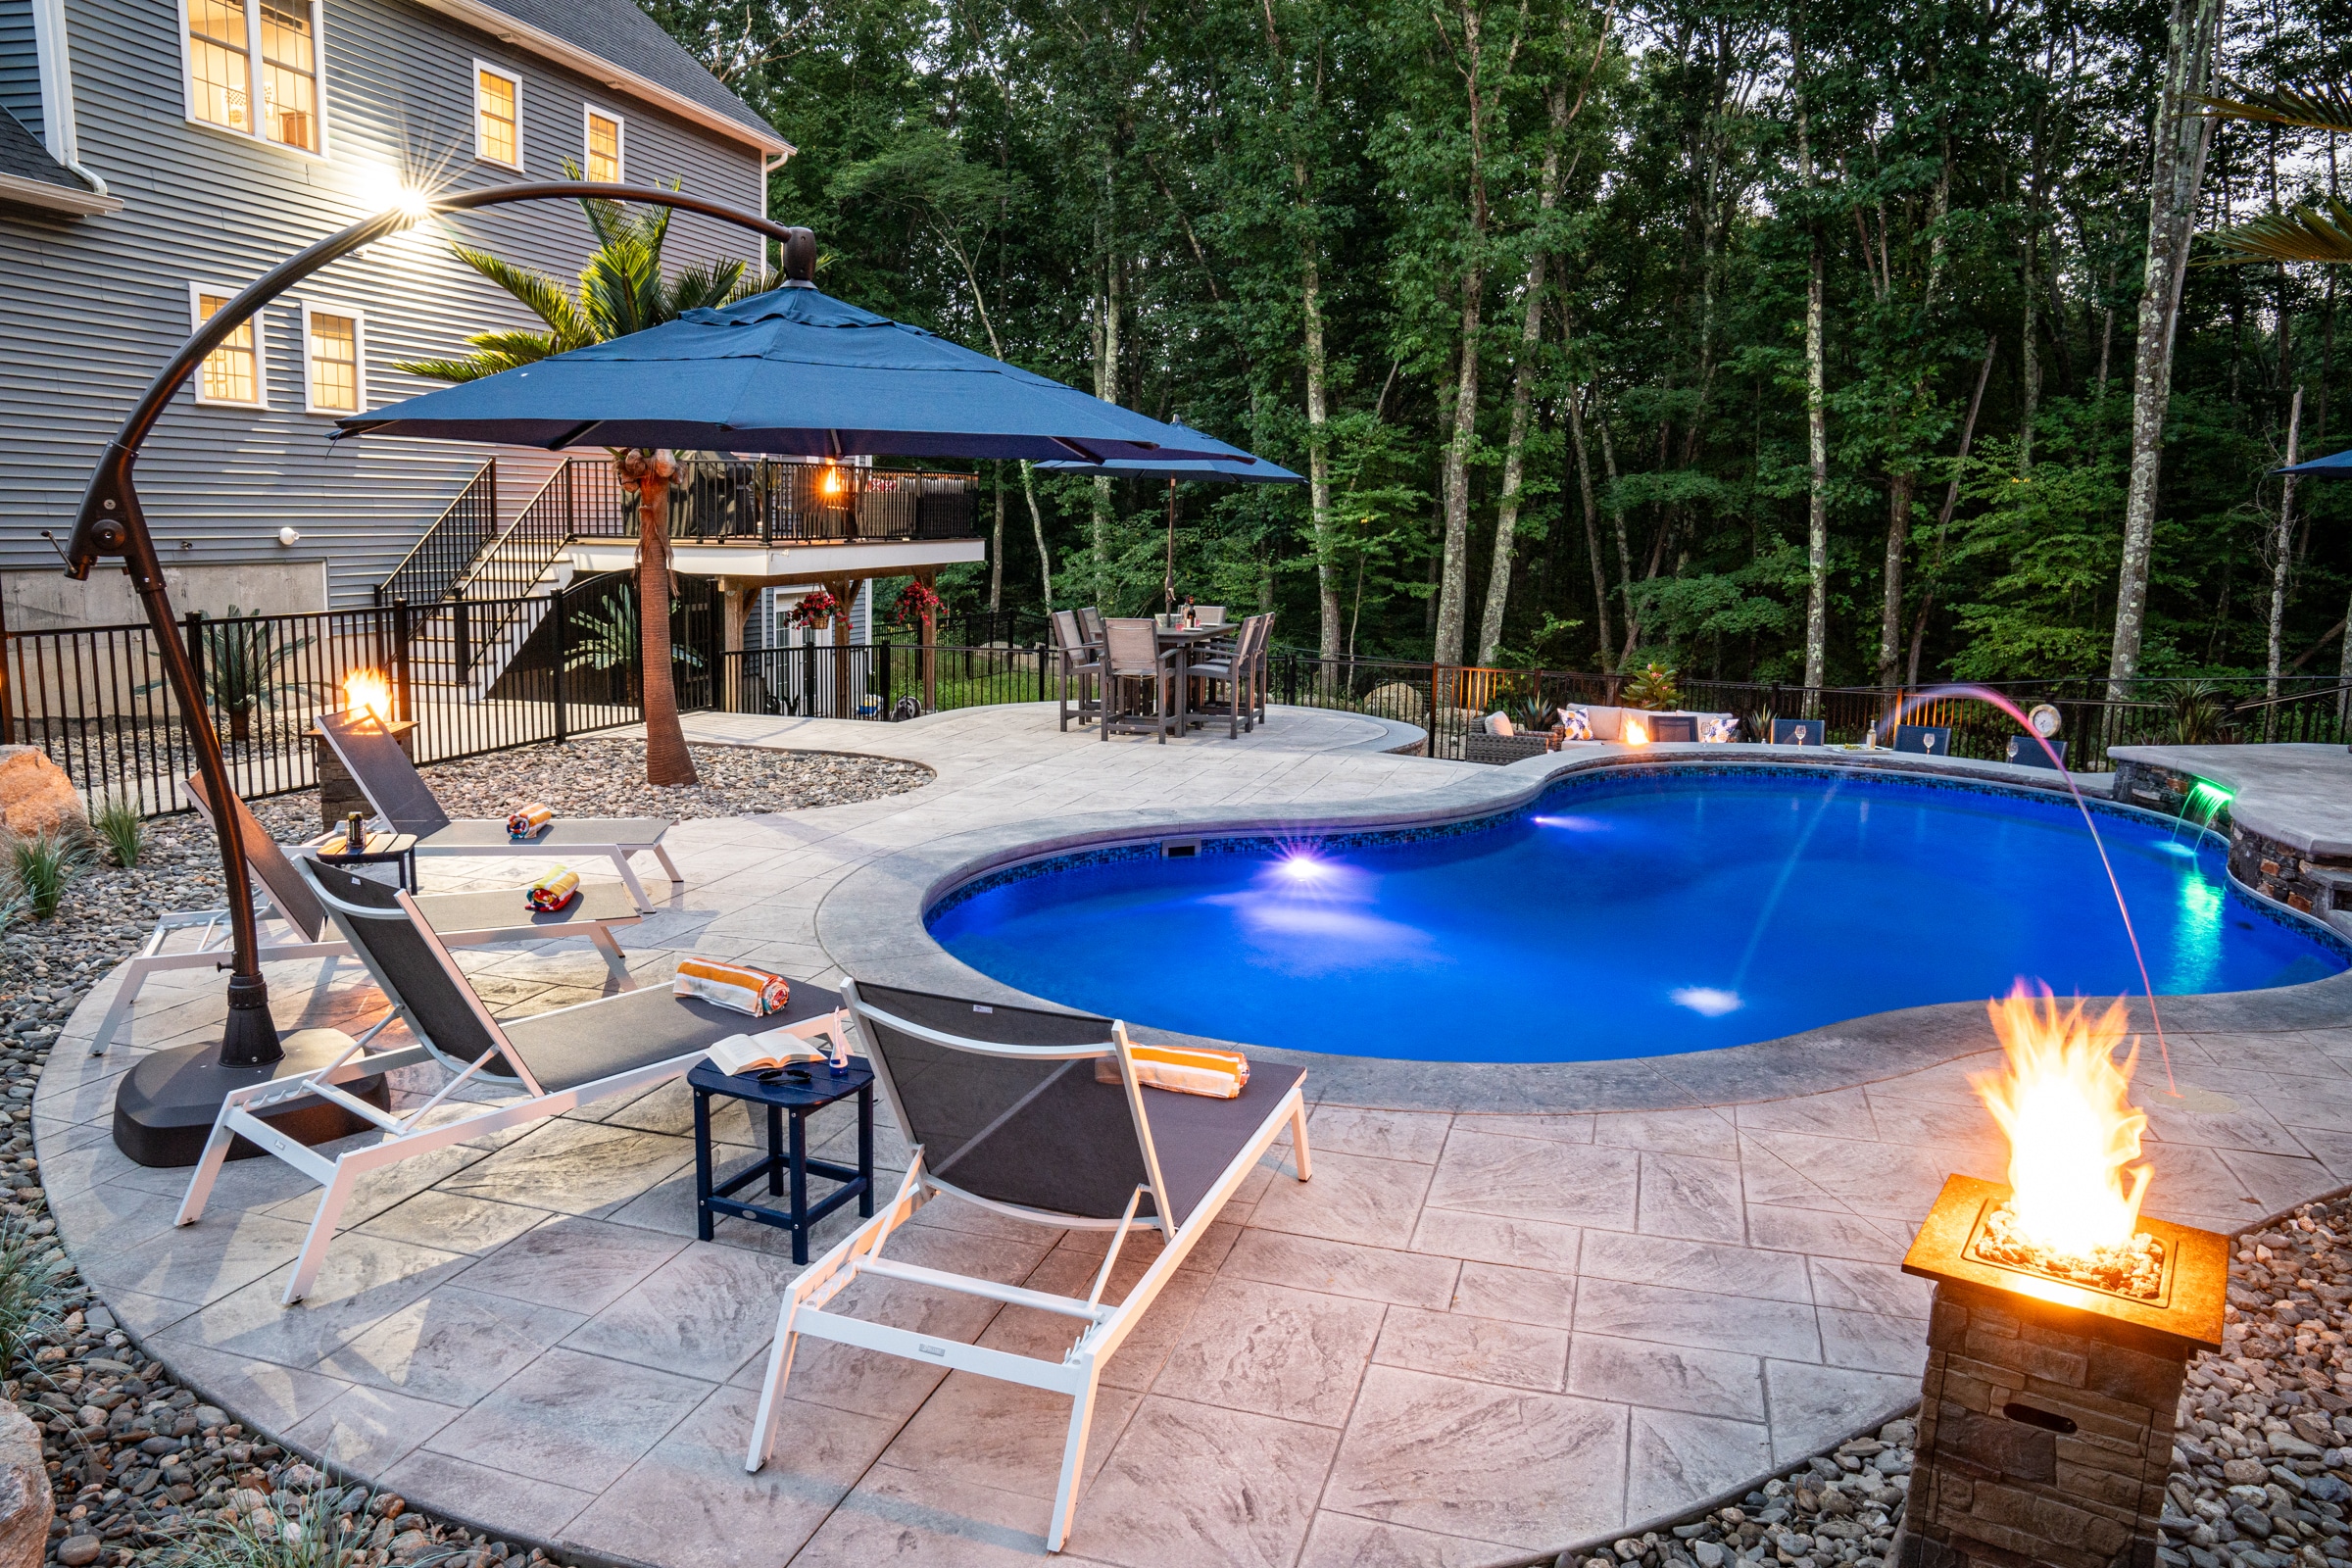 By the glow of fire pits and pool lights, parties can extend well into the evening at this Dex by Terra hardscape project.